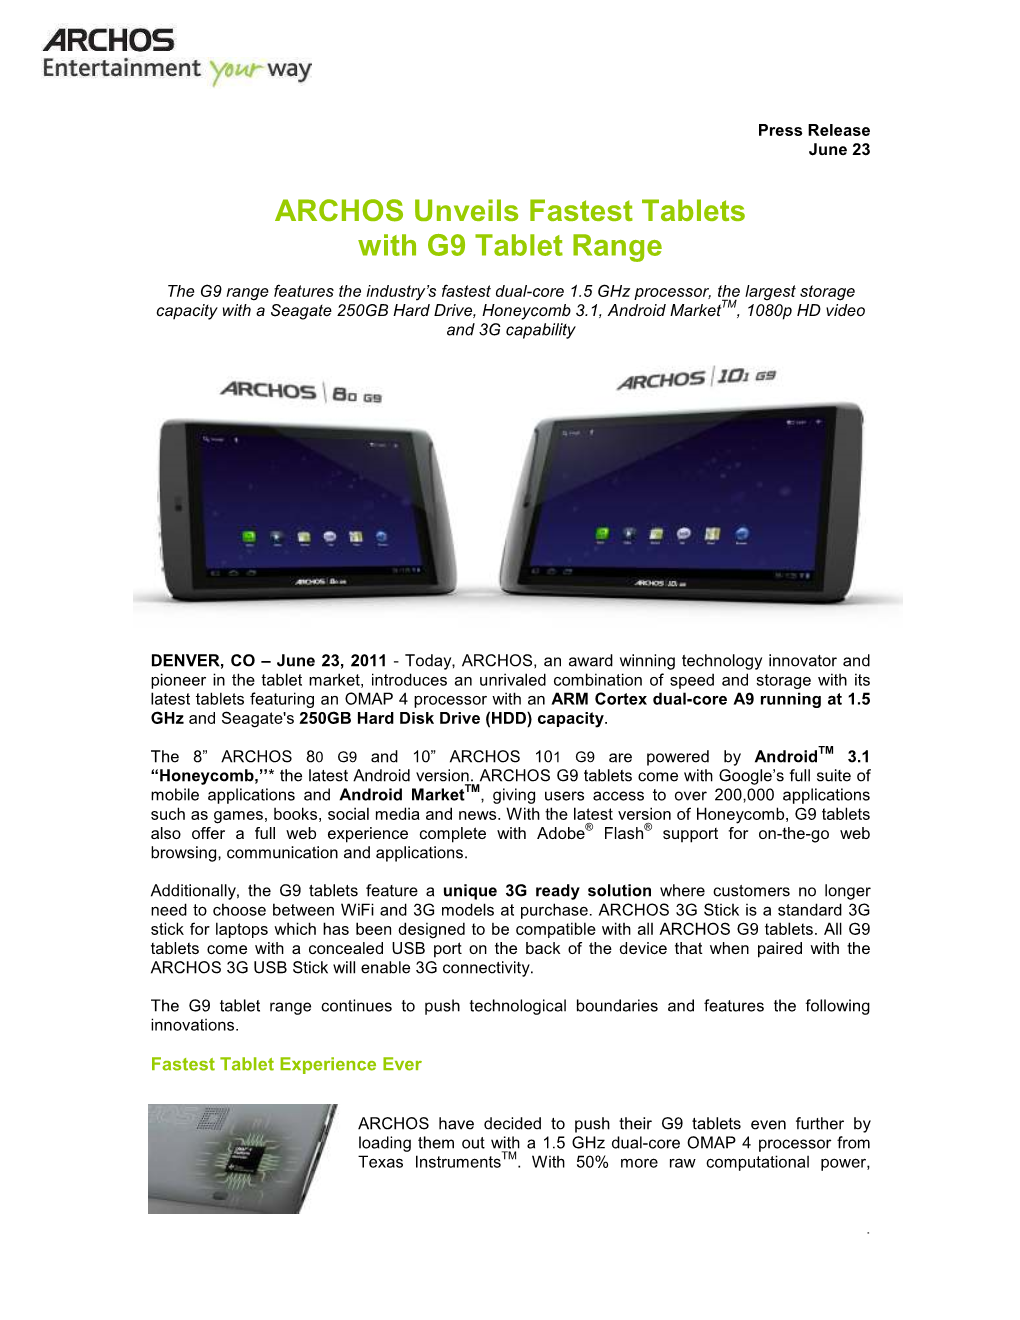 ARCHOS Unveils Fastest Tablets with G9 Tablet Range